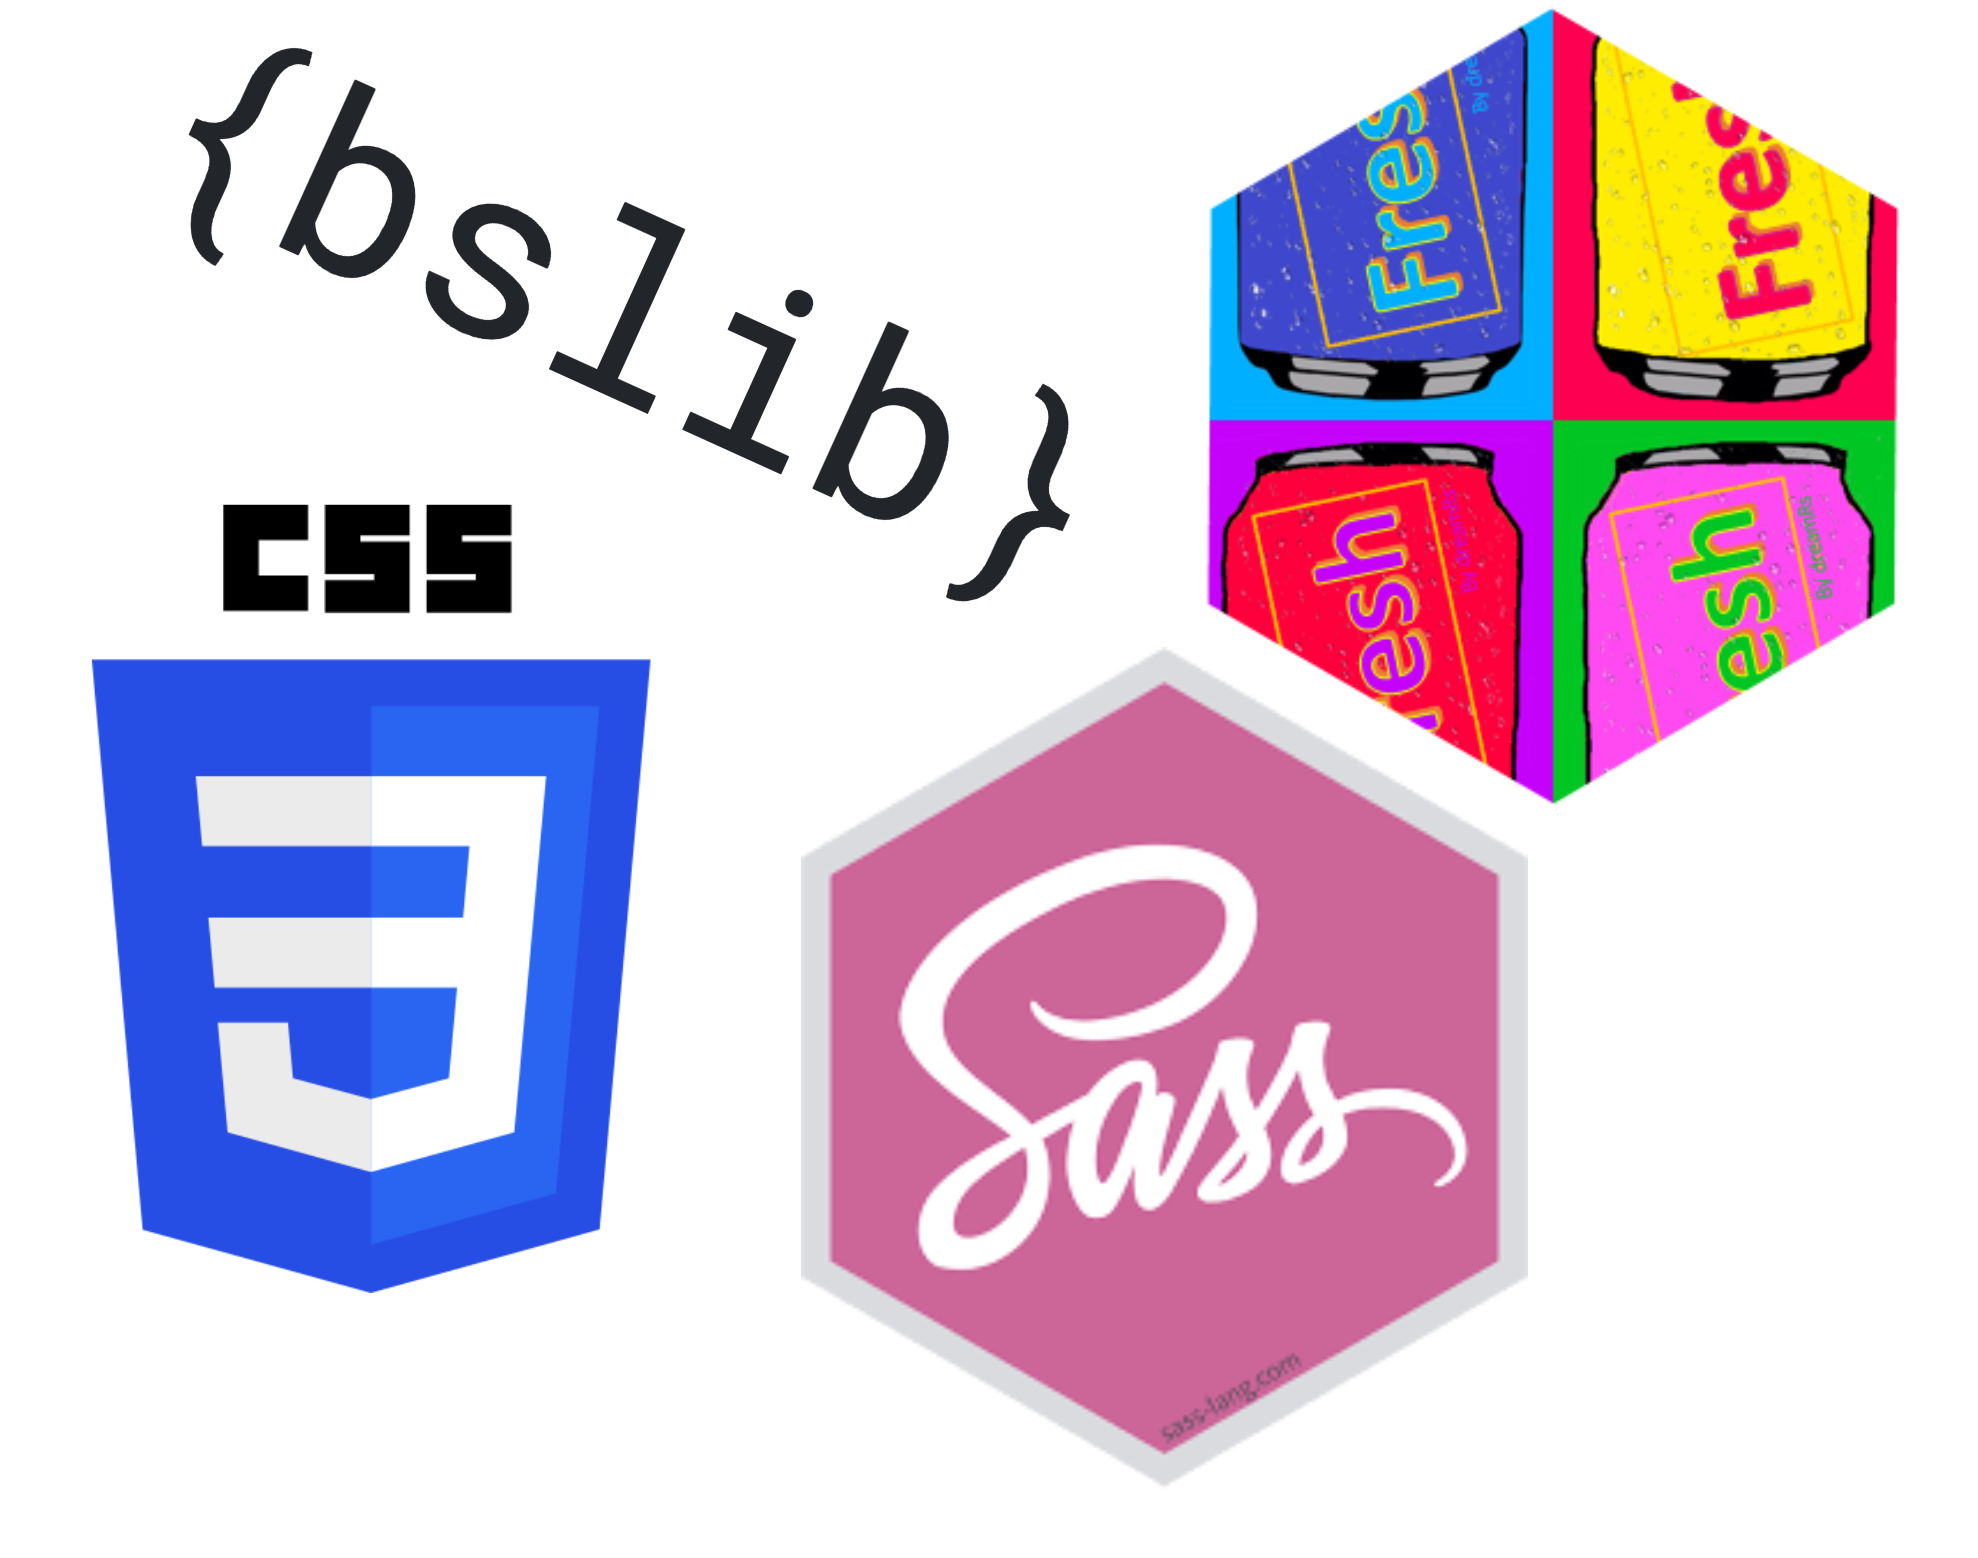 {fresh} and {sass} R package hexes, the logo for CSS 3, and text that reads '{bslib}`